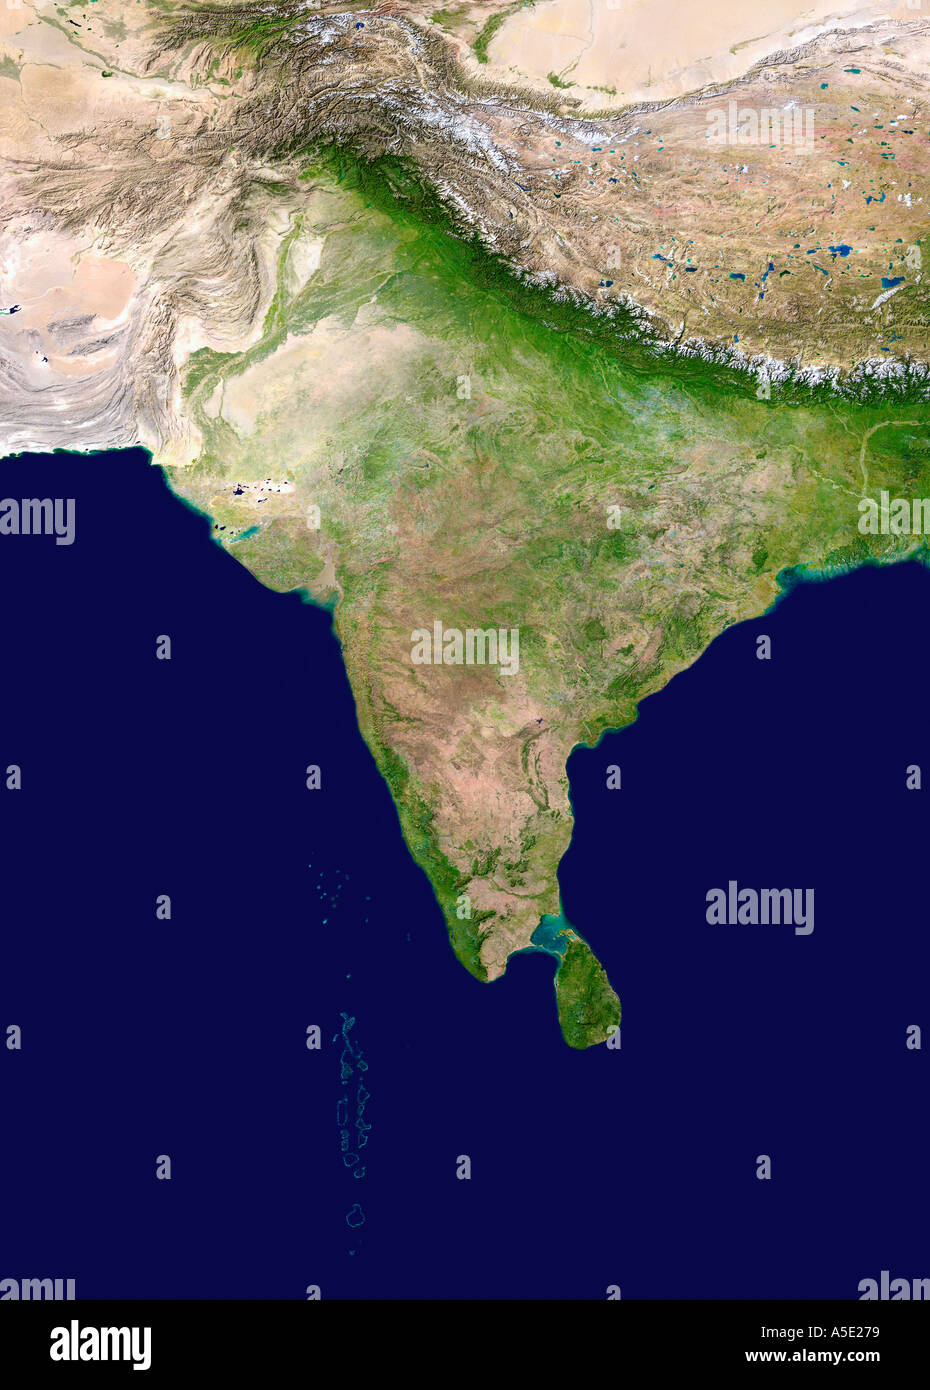 satellite-image-of-the-indian-subcontinent-earth-from-space-A5E279.jpg